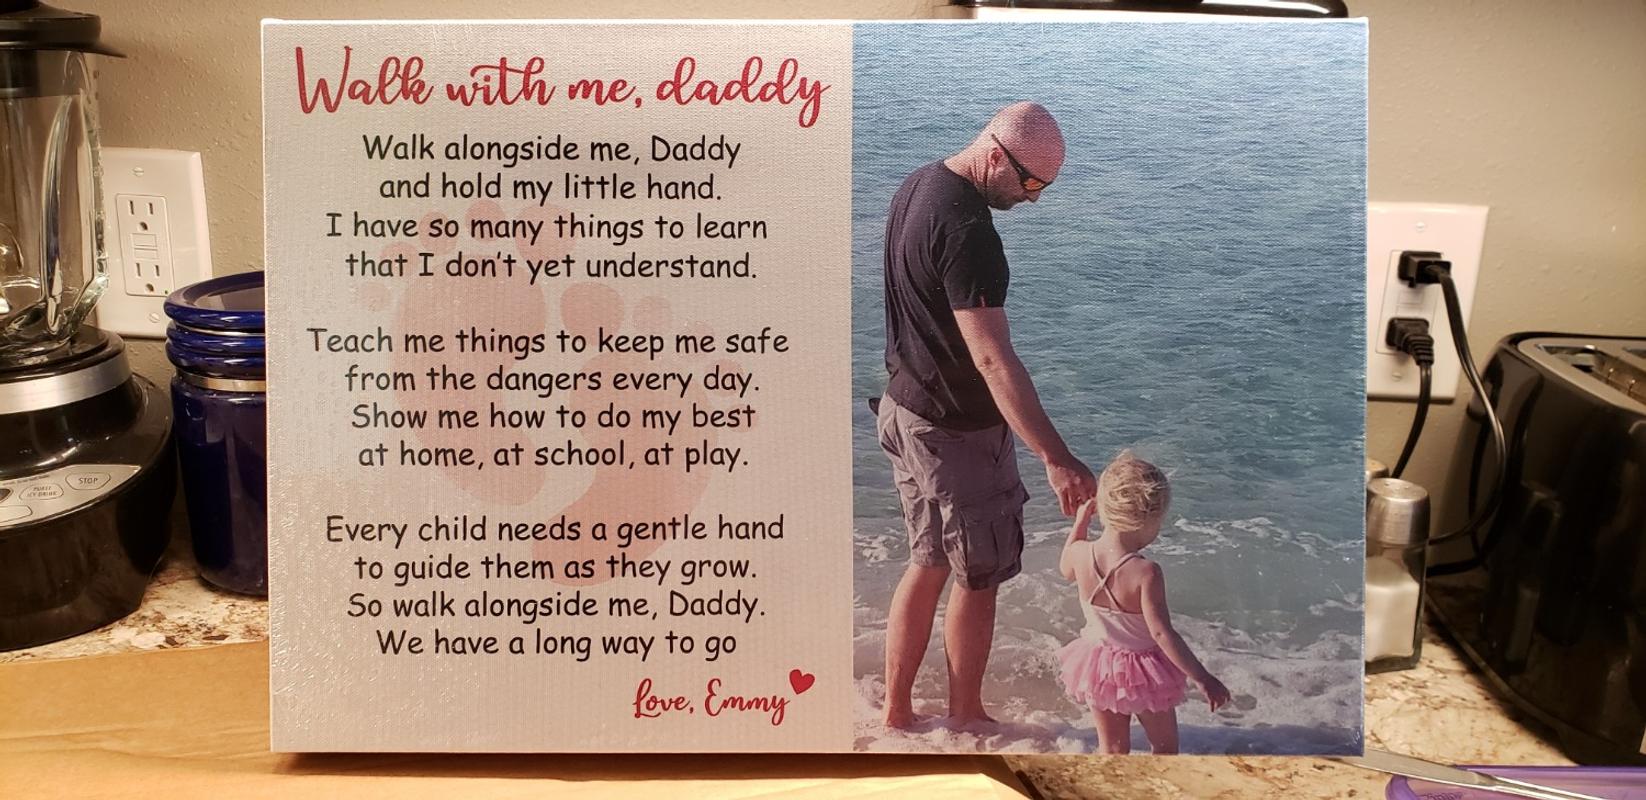 walk-with-me-daddy-poem-photo-canvas-print-365canvas